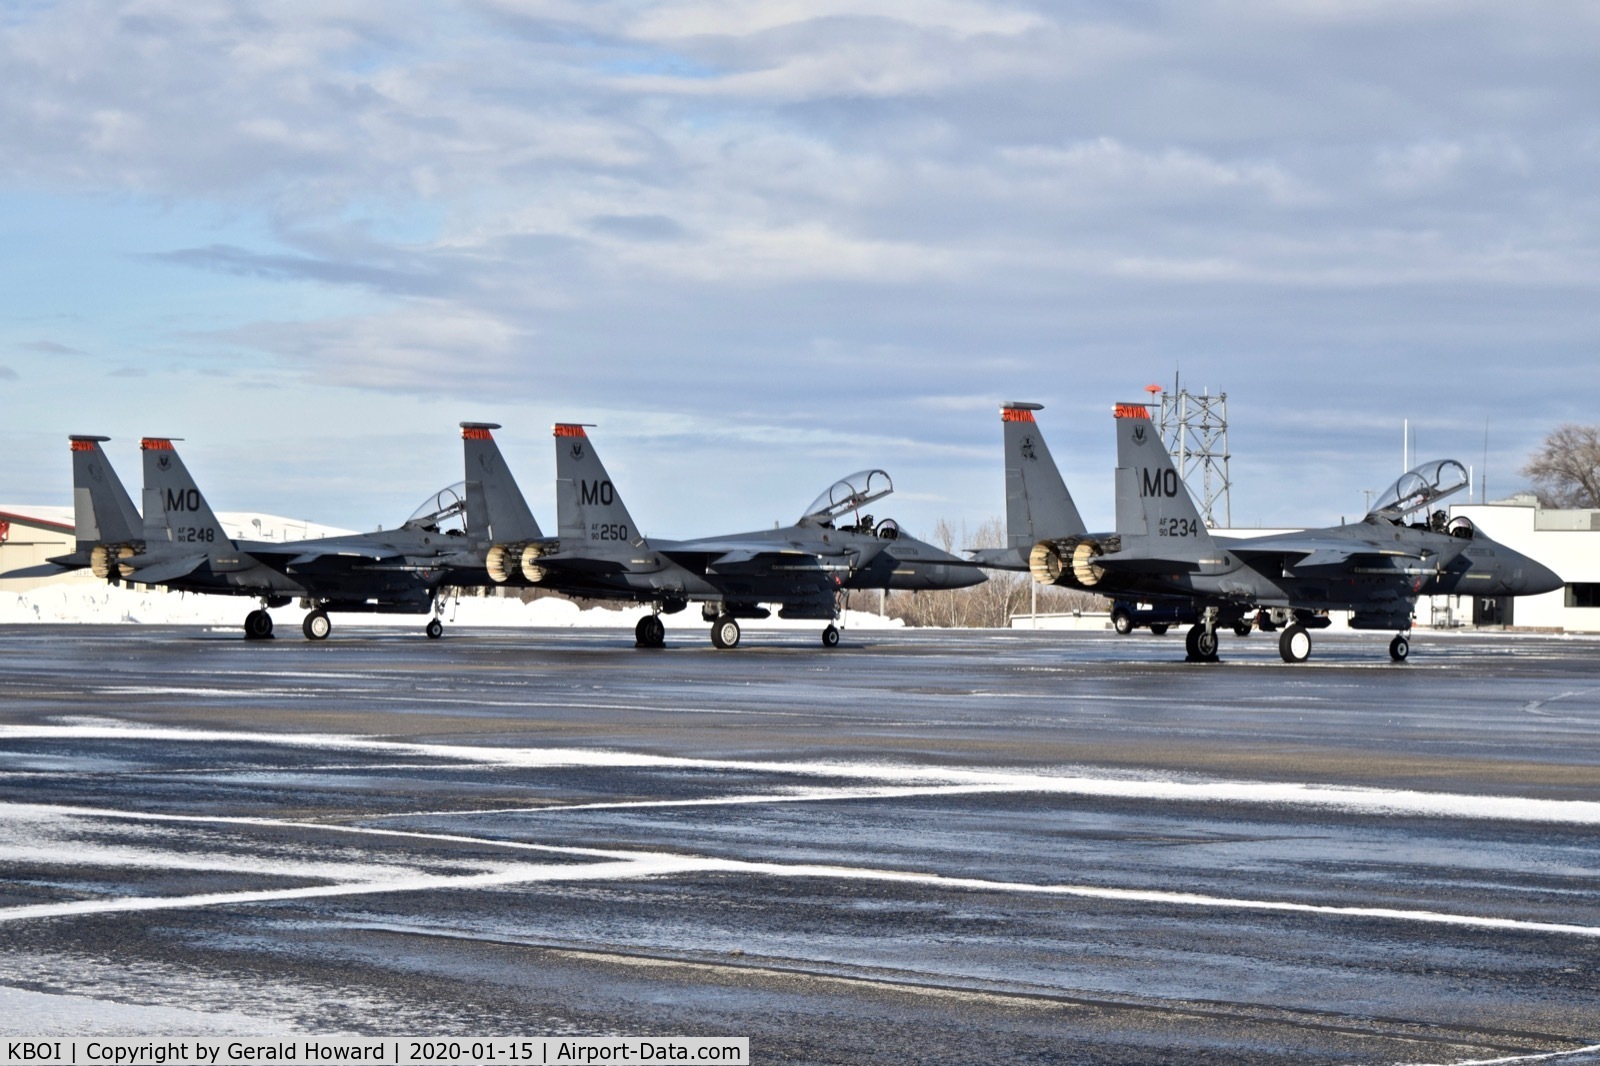 Boise Air Terminal/gowen Fld Airport (BOI) - 3 of 7 F-15Es from the 391st Fighter Sq., 366th Fighter Wing from Mountain Home AFB, ID parked on the north GA ramp.